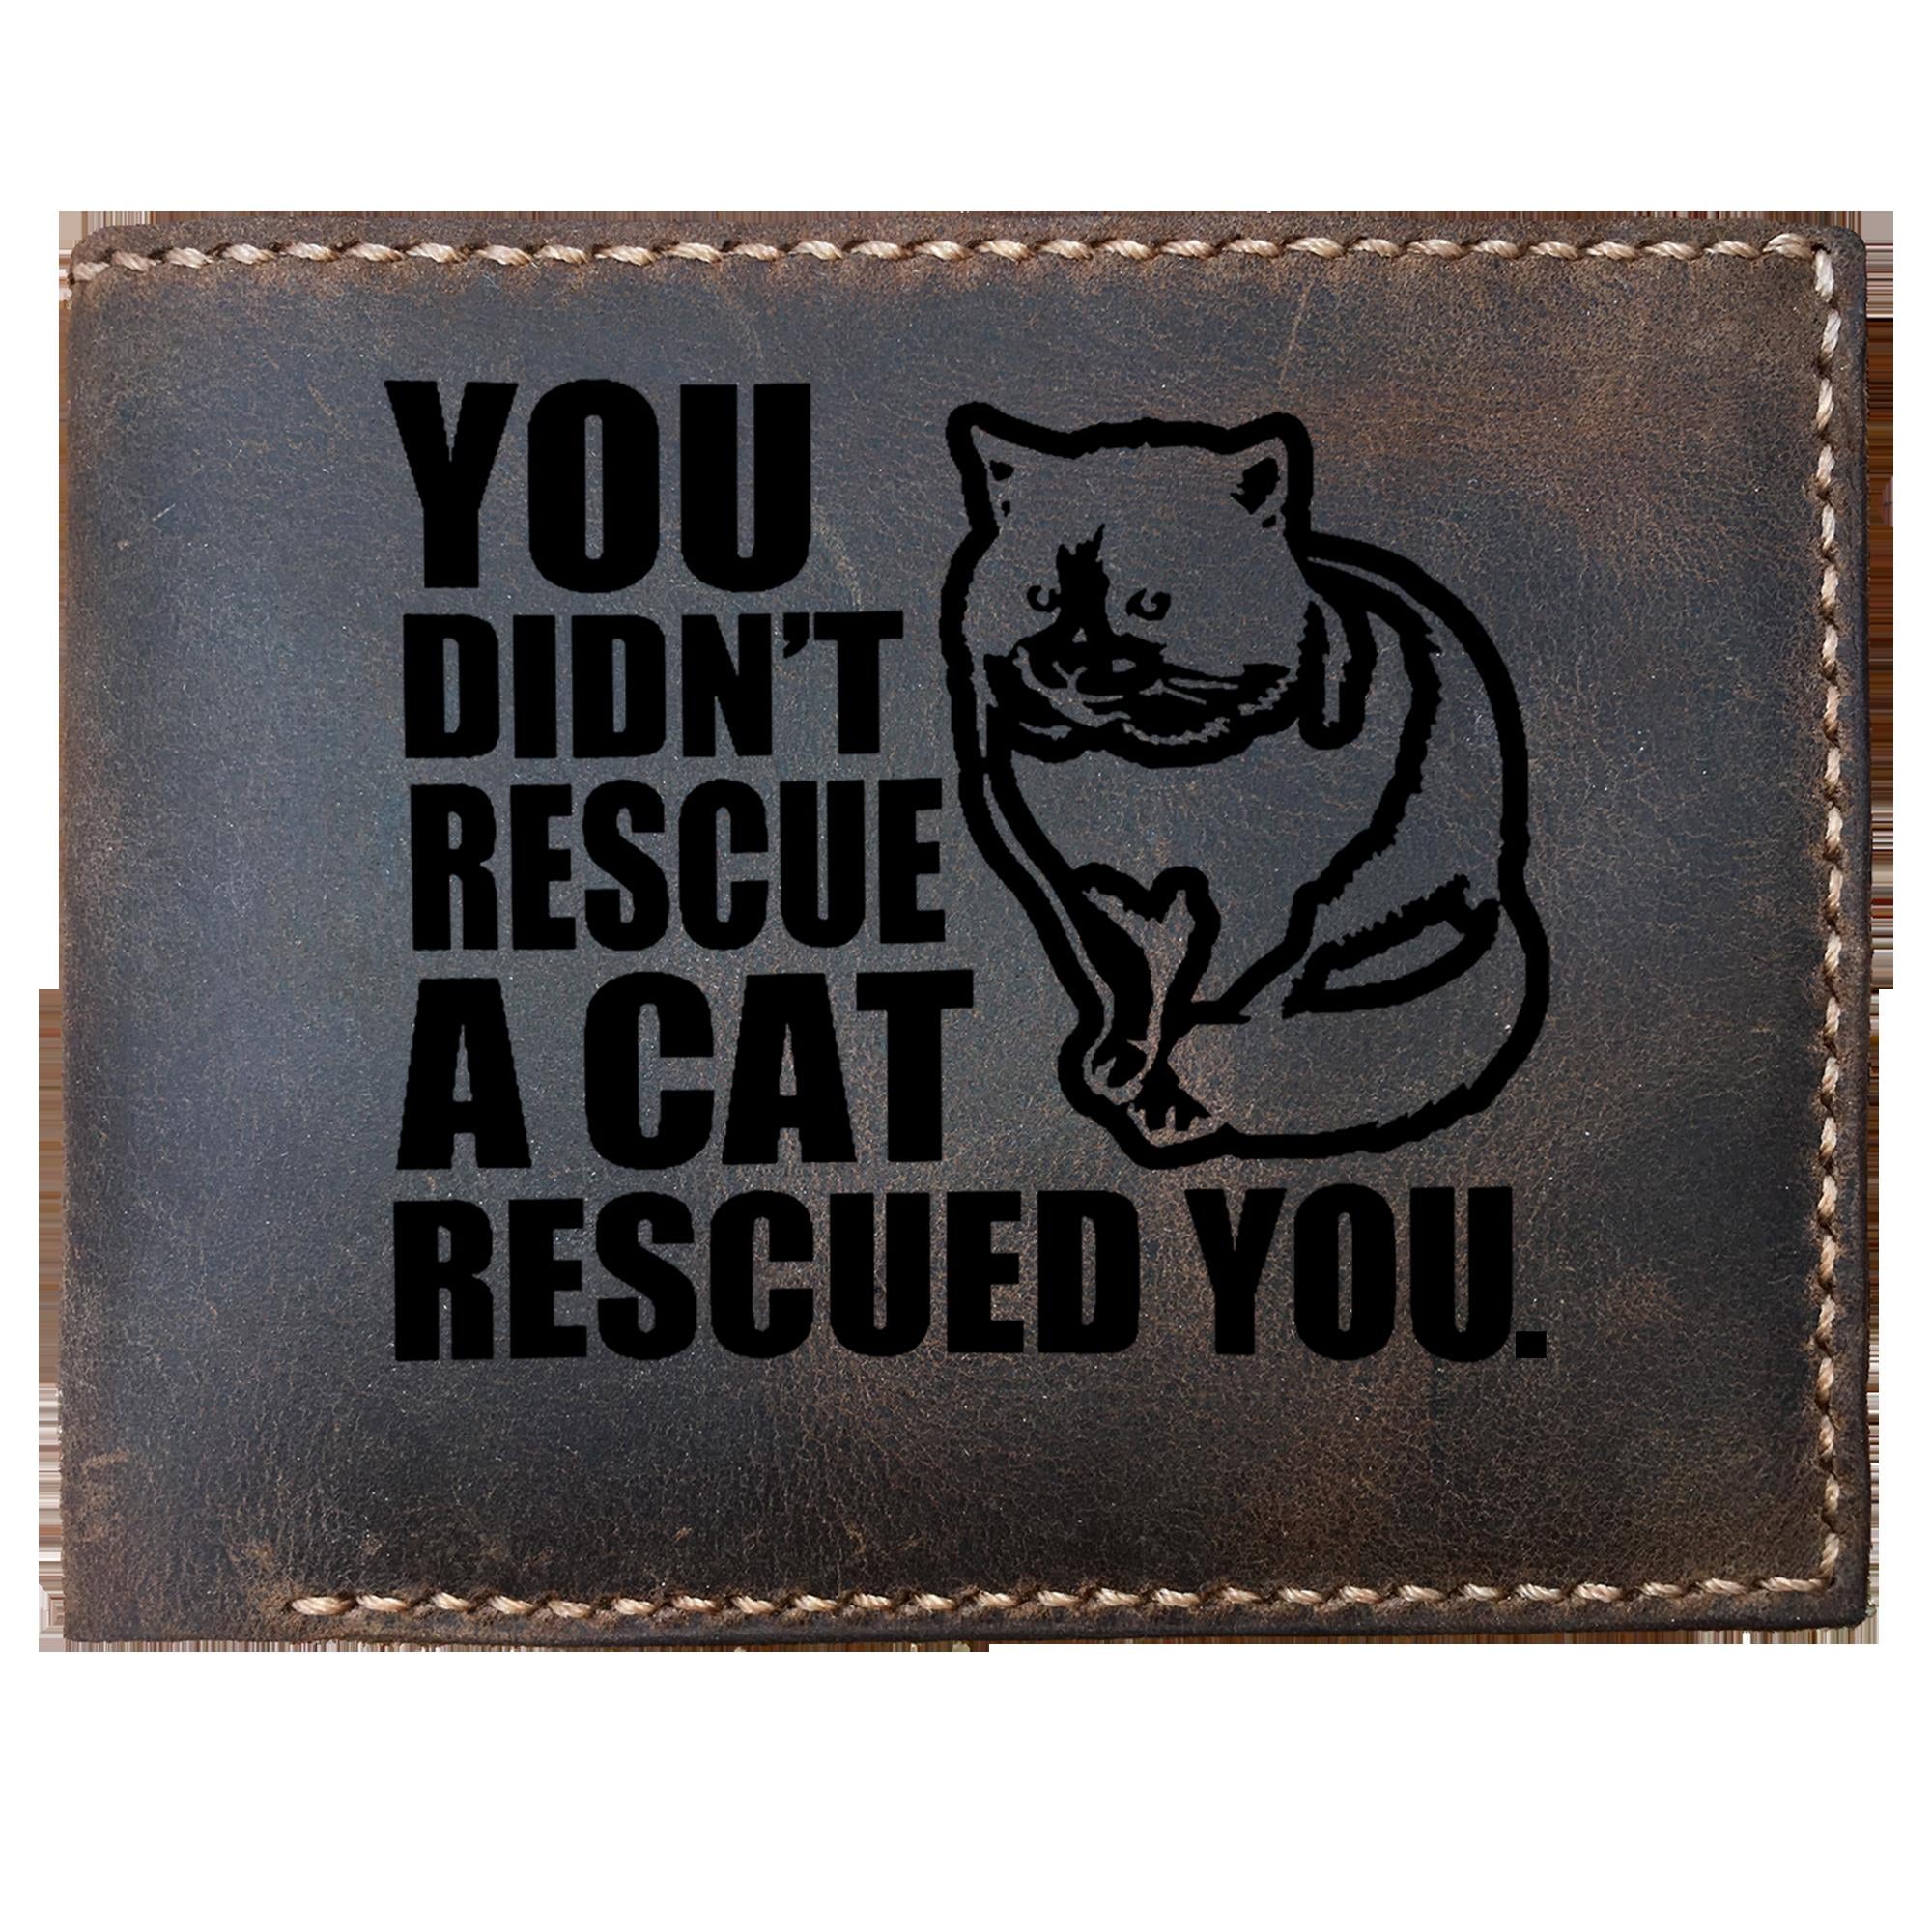 Skitongifts Funny Custom Laser Engraved Bifold Leather Wallet For Men, Cat Lovers You Didnt Rescue A Cat Rescued You